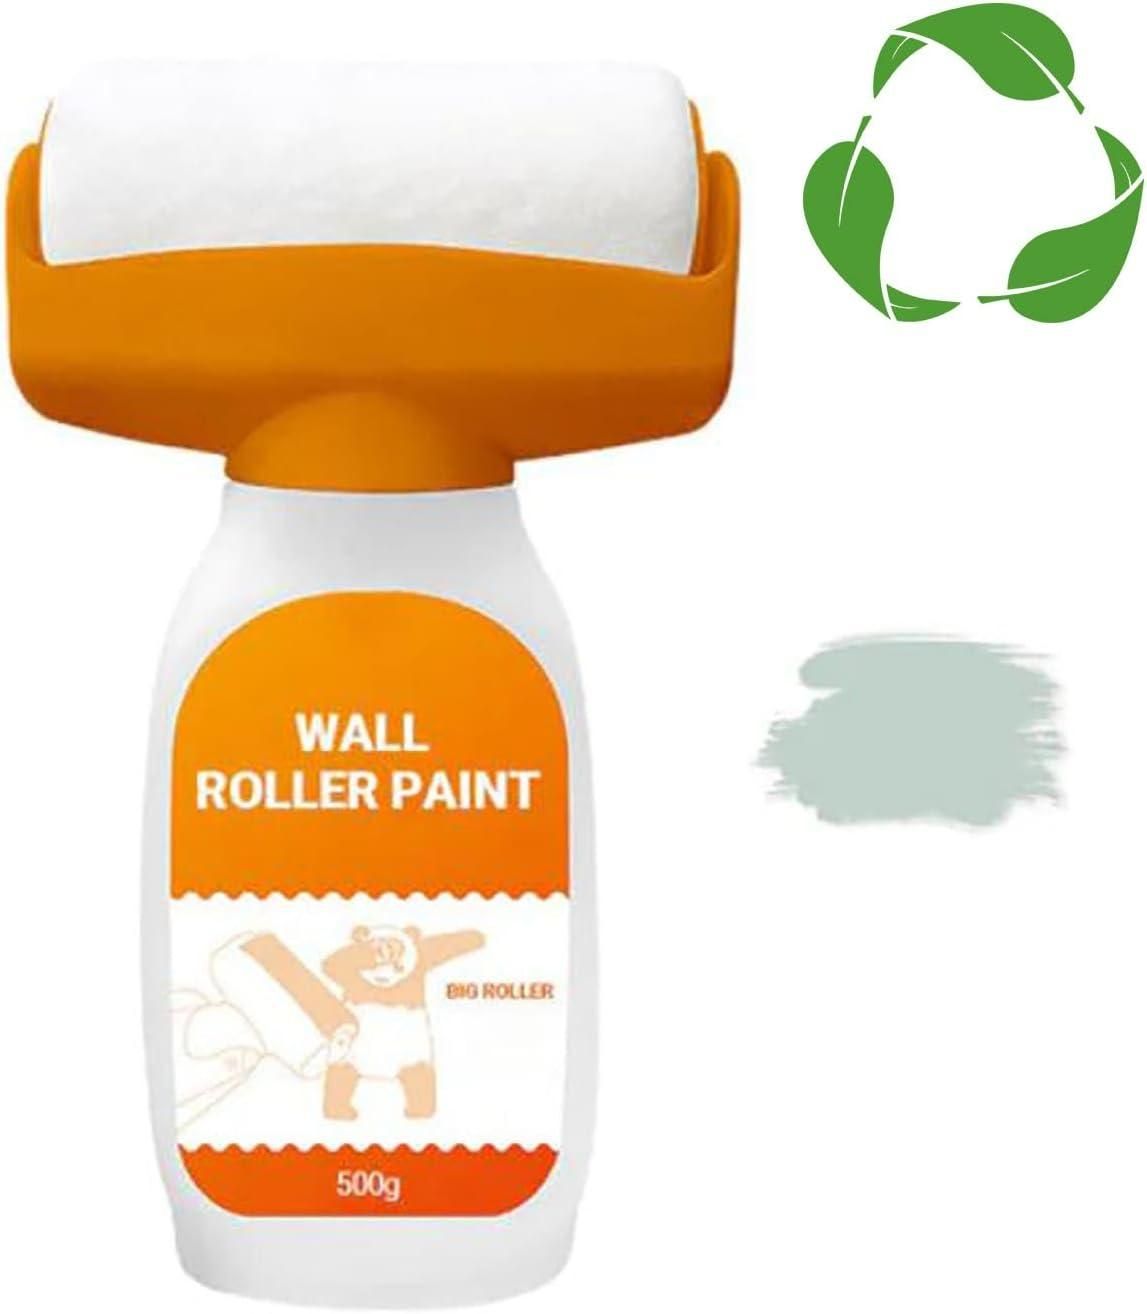 Small Roller Paint Wall Patching Brush